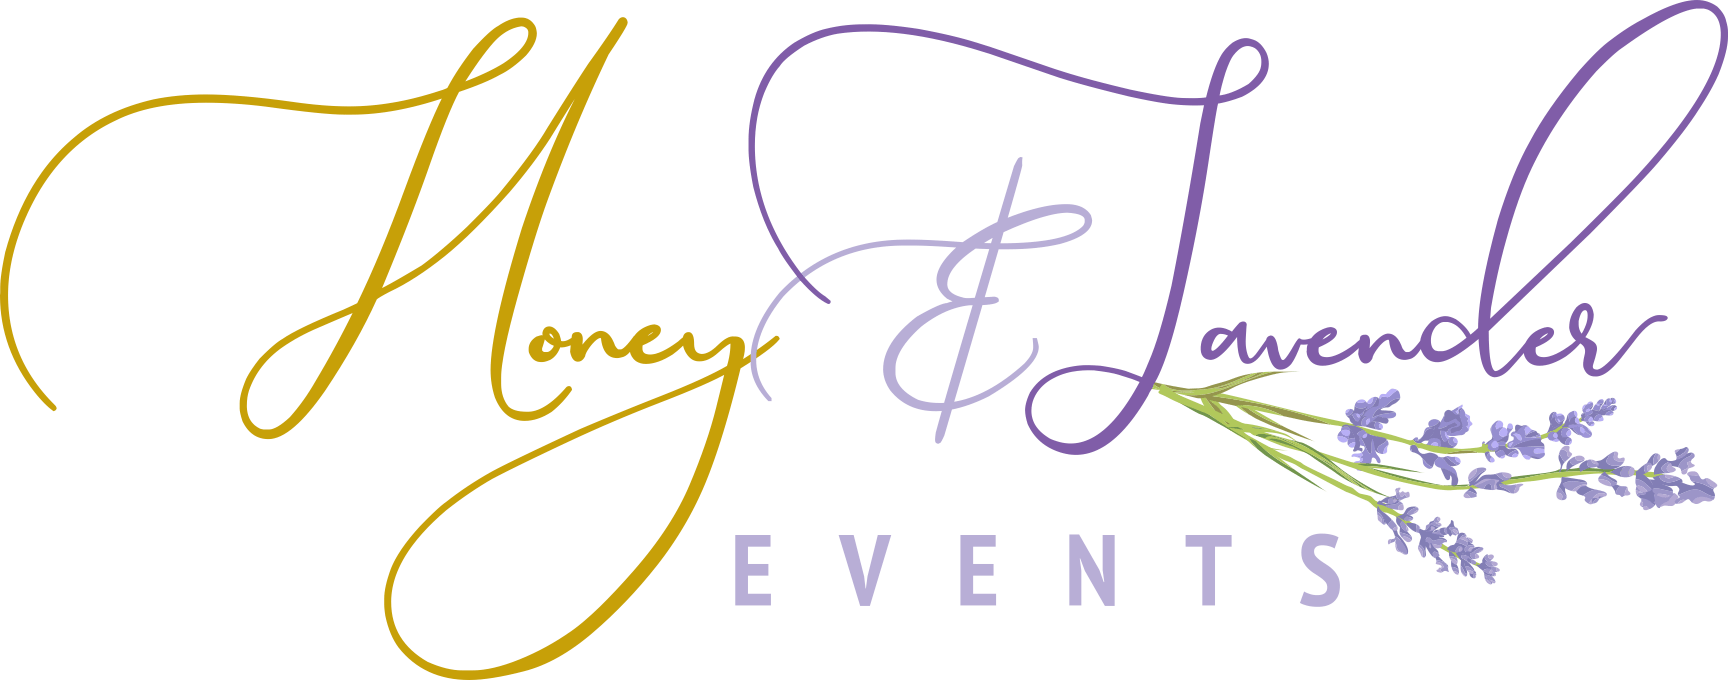 Honey and Lavender Events